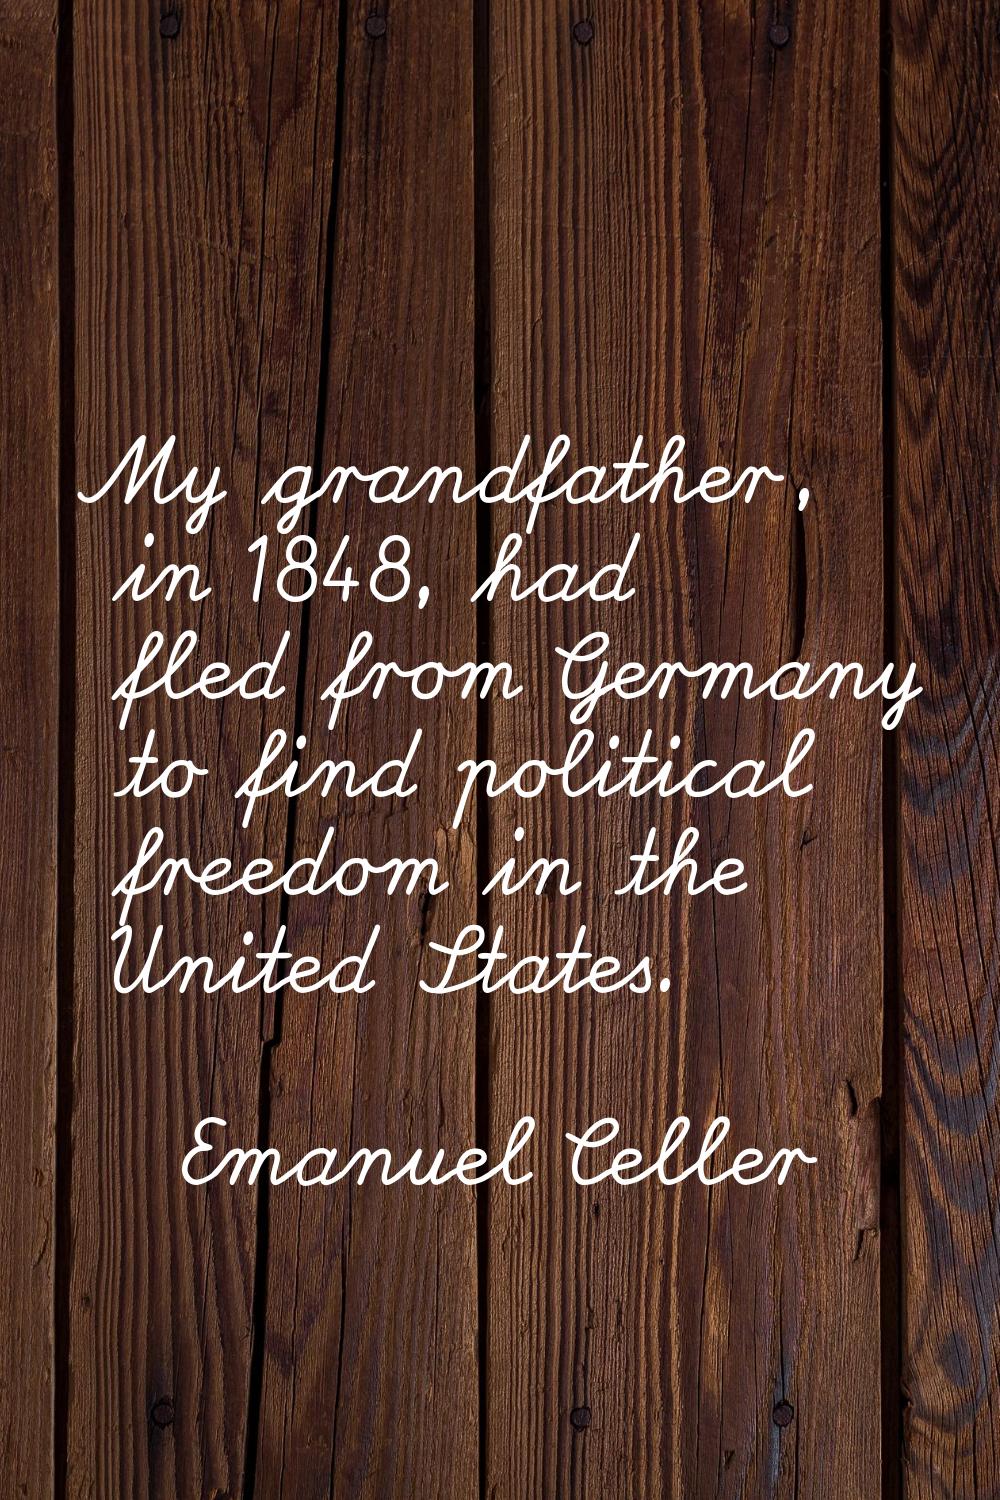 My grandfather, in 1848, had fled from Germany to find political freedom in the United States.